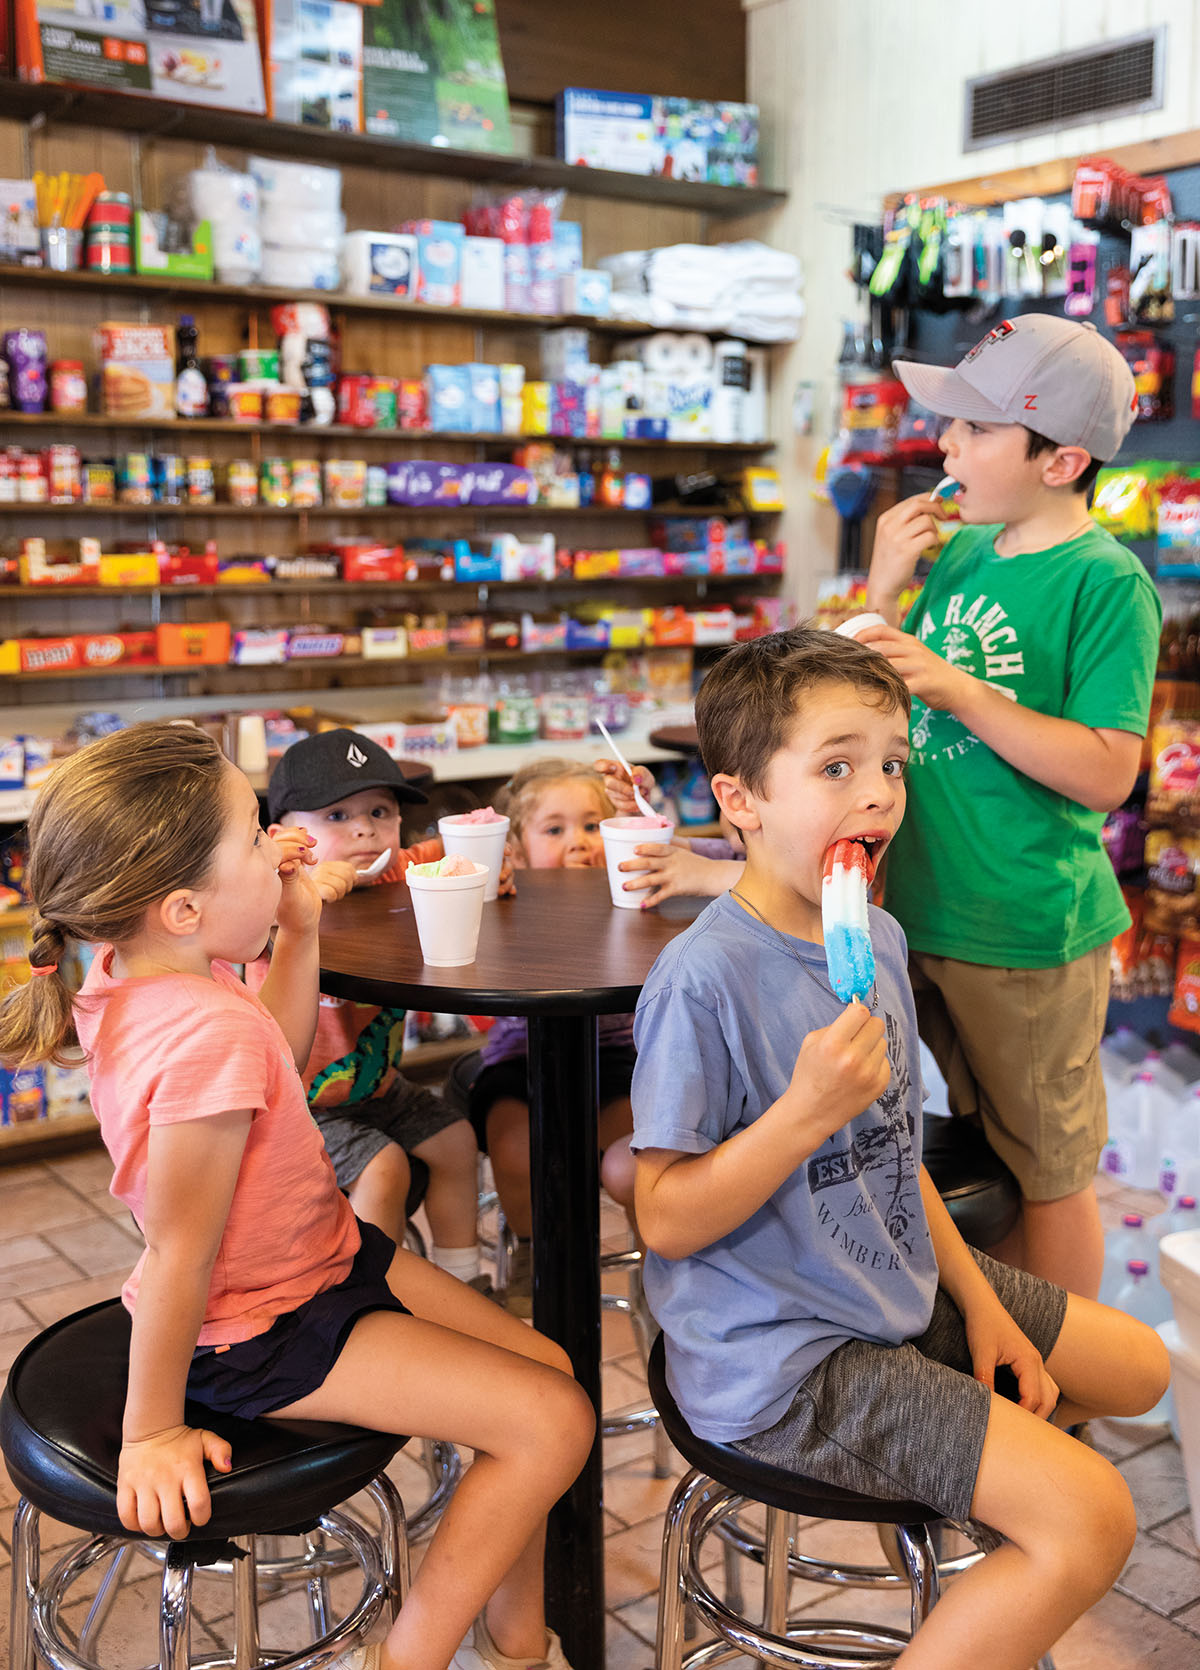 A group of children eat popsicles and other cold treats inside of a well-stocked store